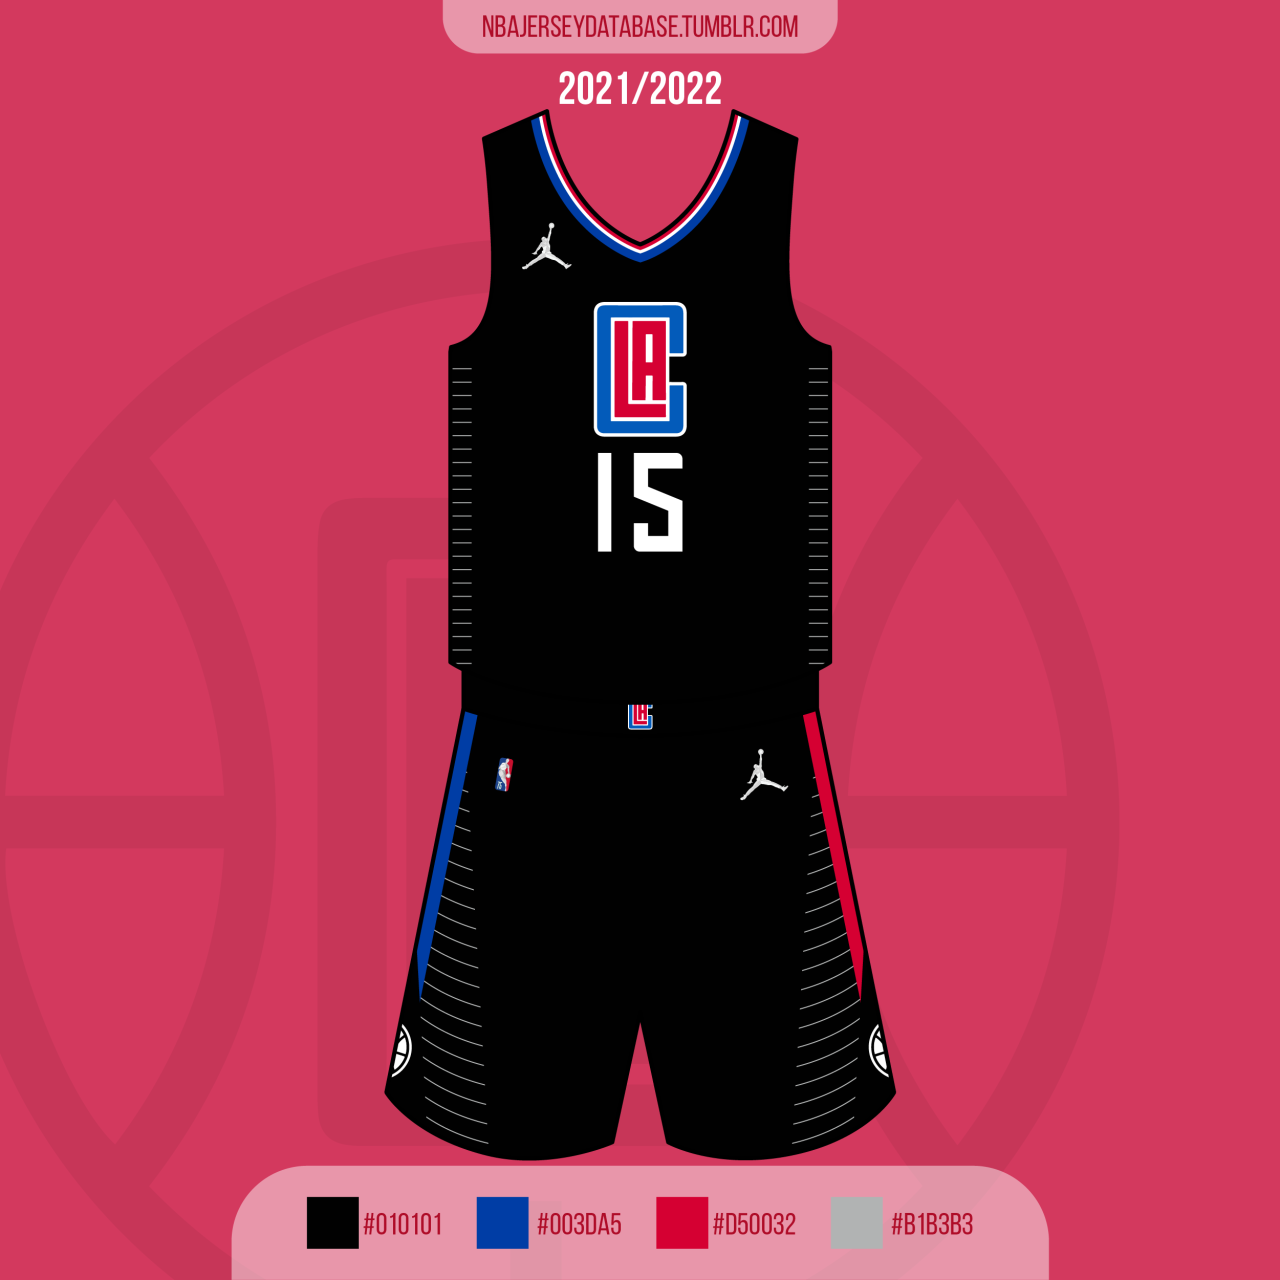 NBA Jersey Database, Los Angeles Clippers Statement Jersey 2020